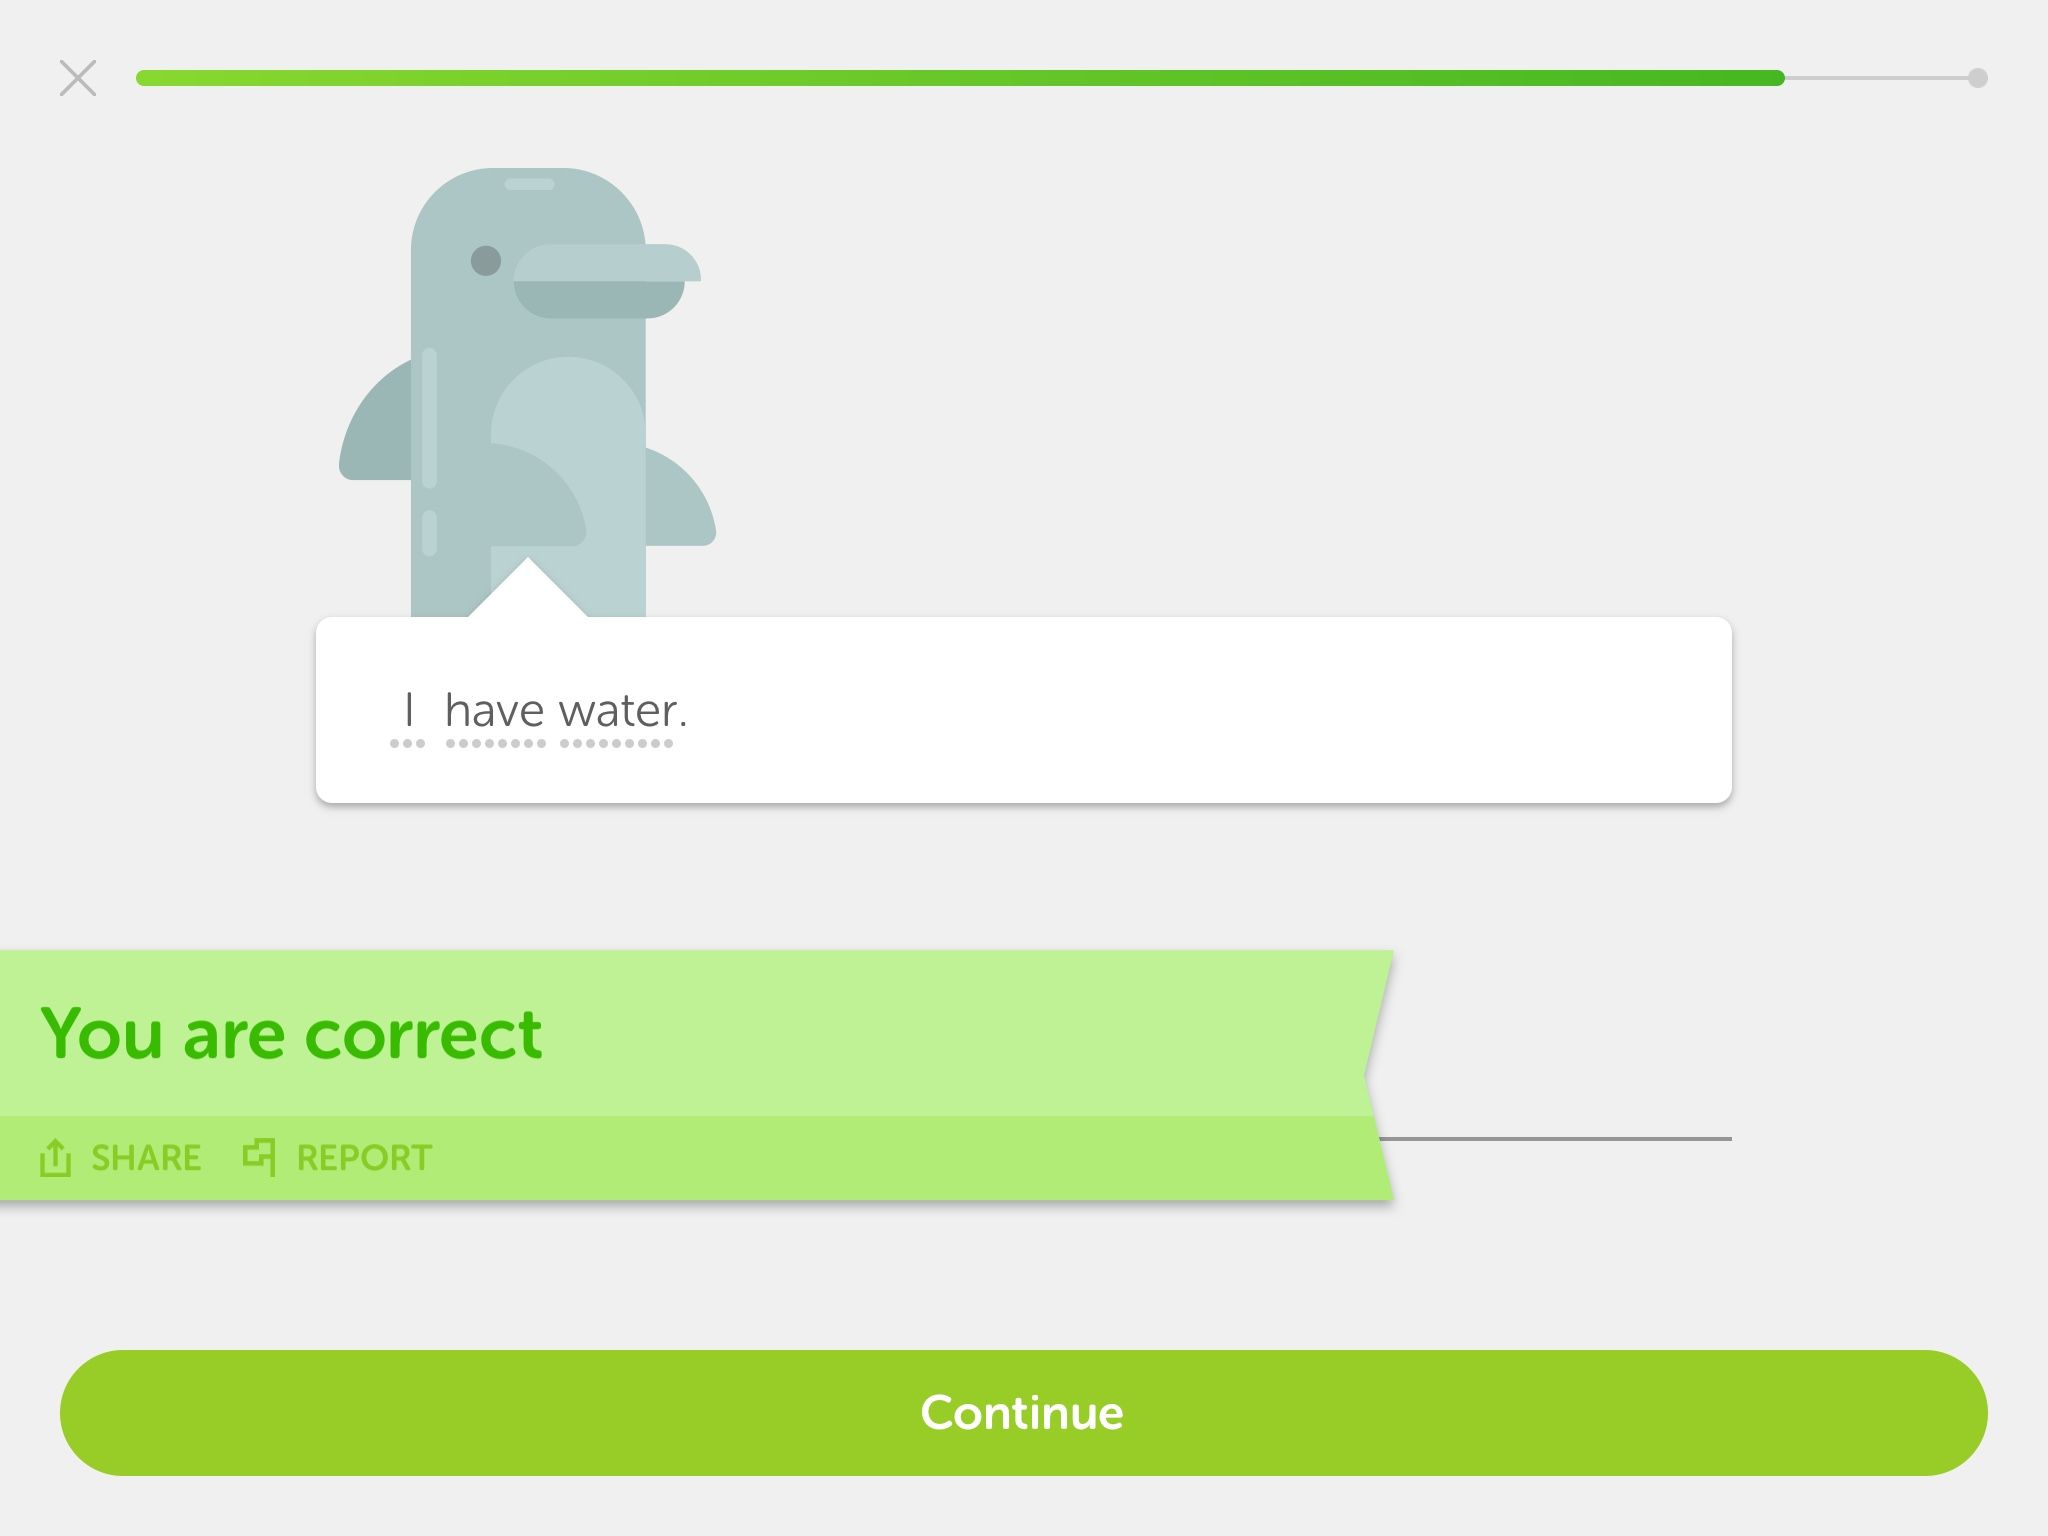 Just on duolingo, when suddenly a dolphin